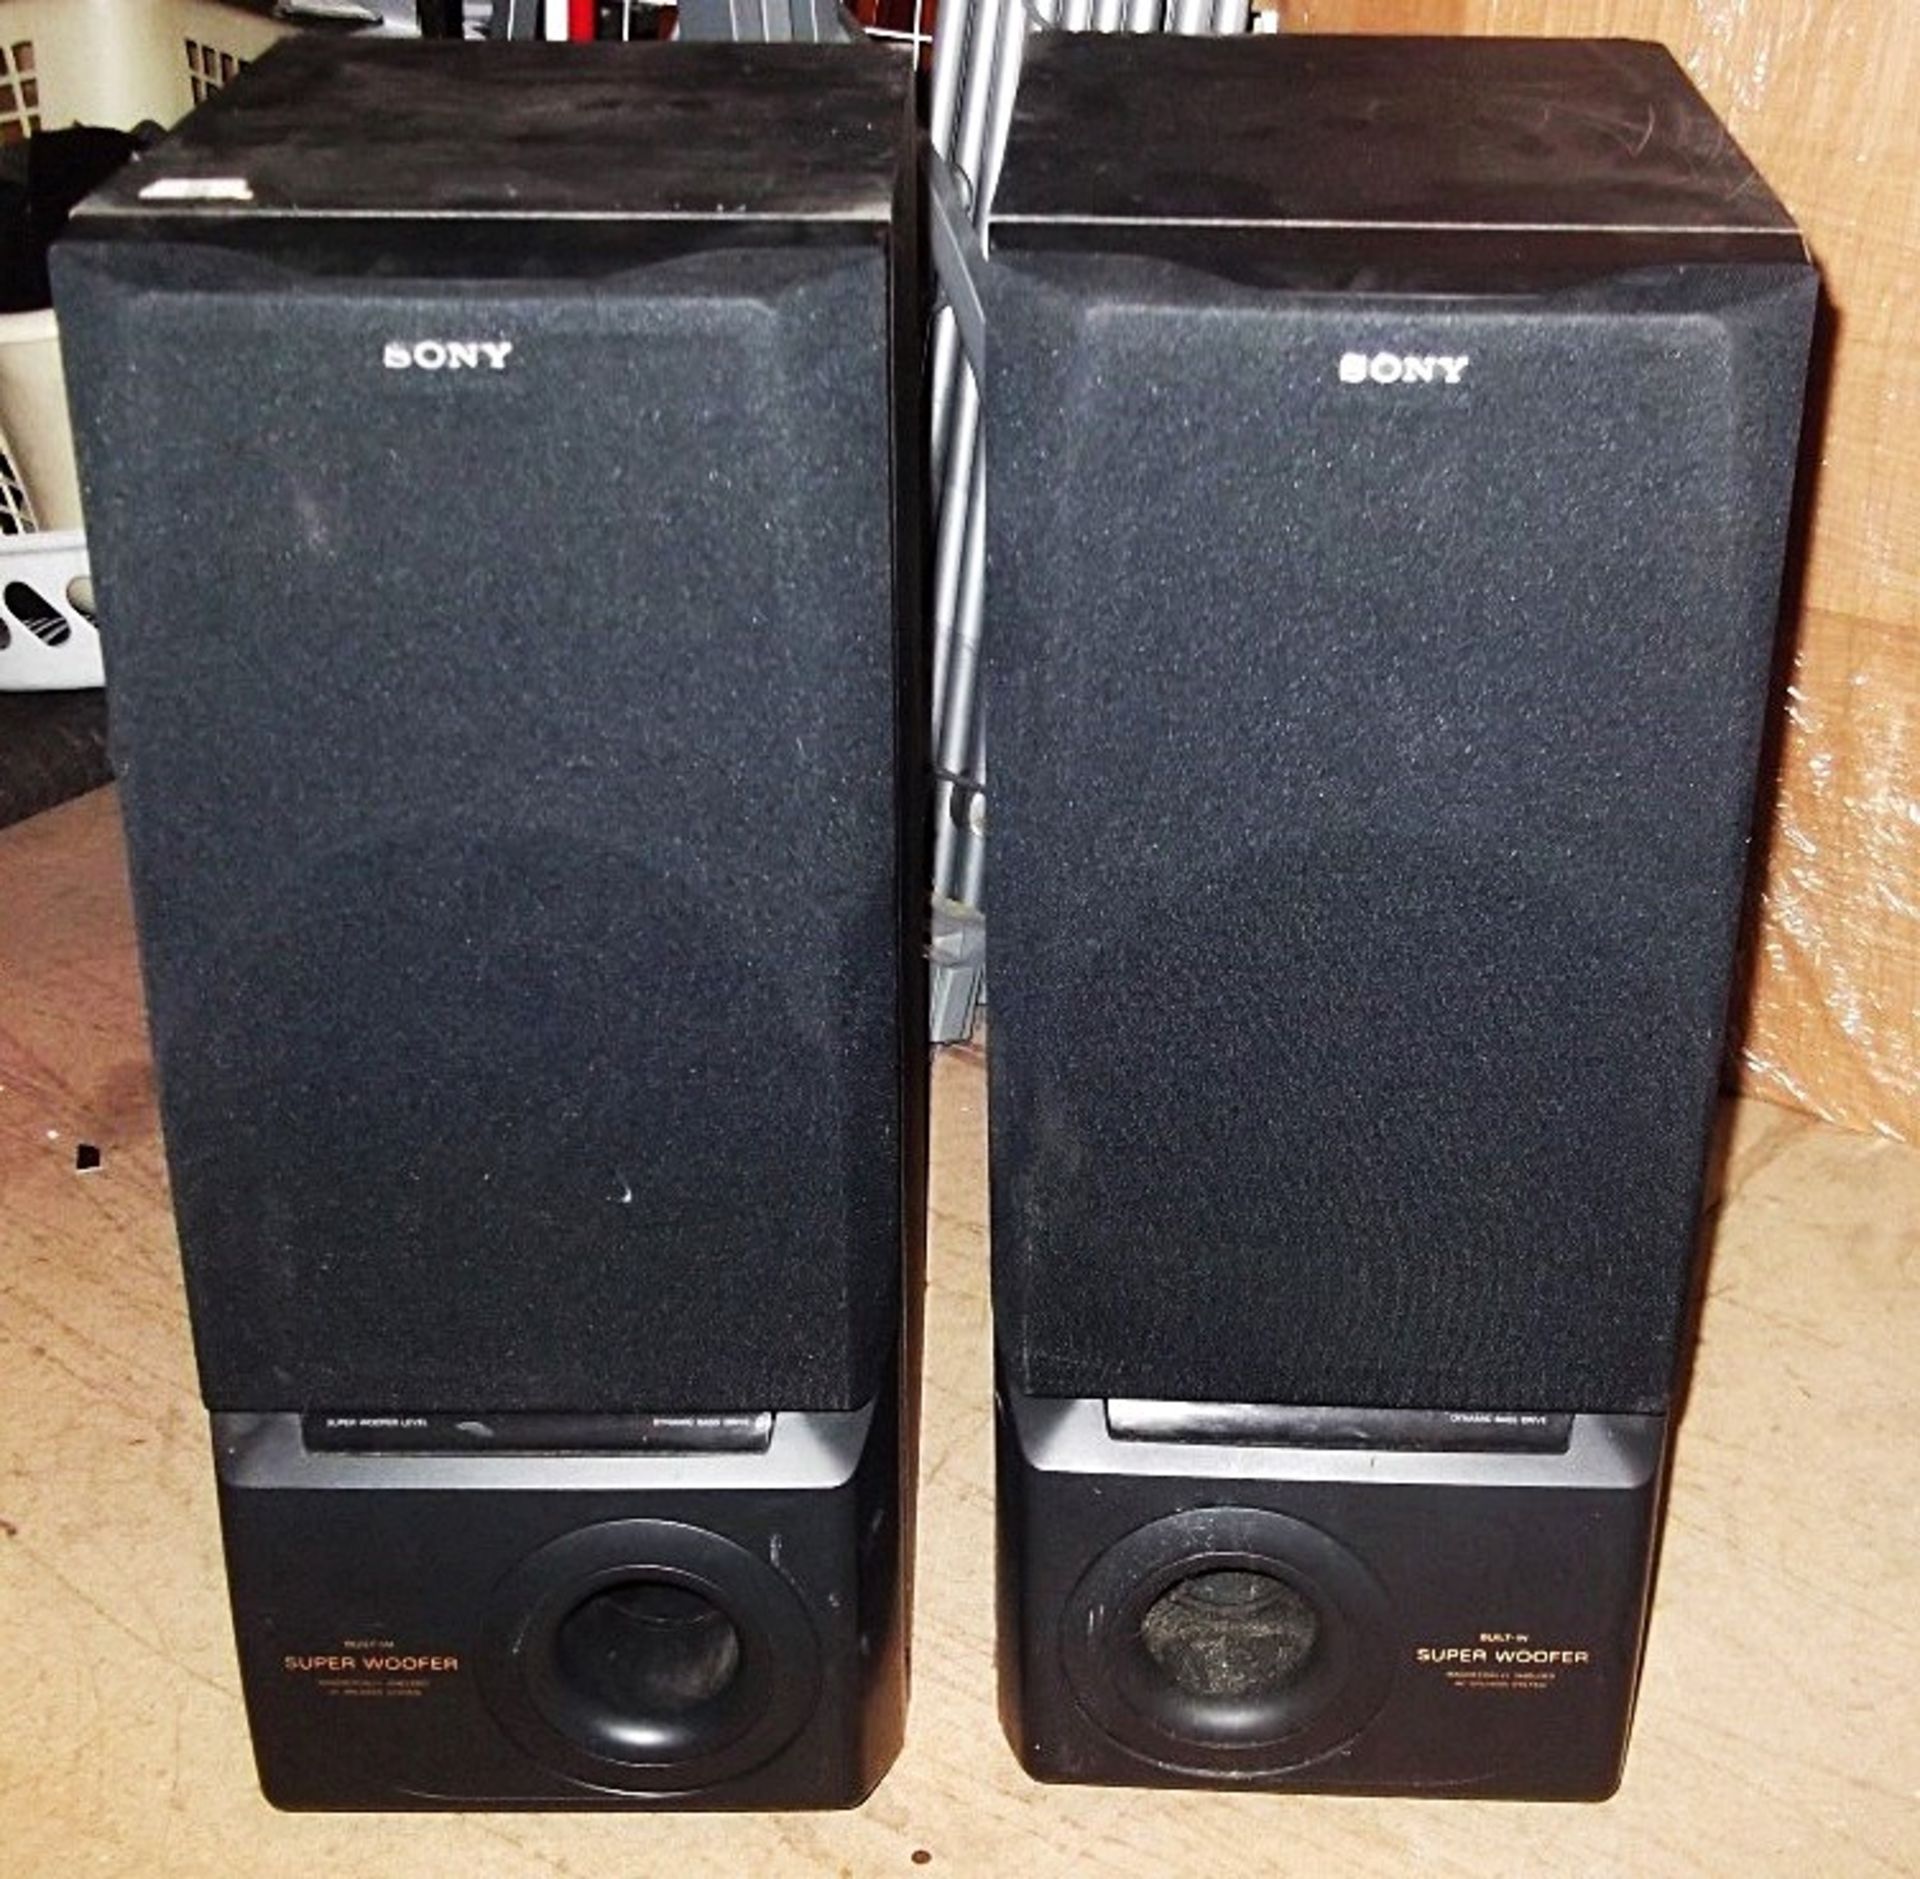 Set of 2 x Sony Speakers With Built-In Super Woofer - Model: SS-LB655AV- PD064 - CL079 - Location: